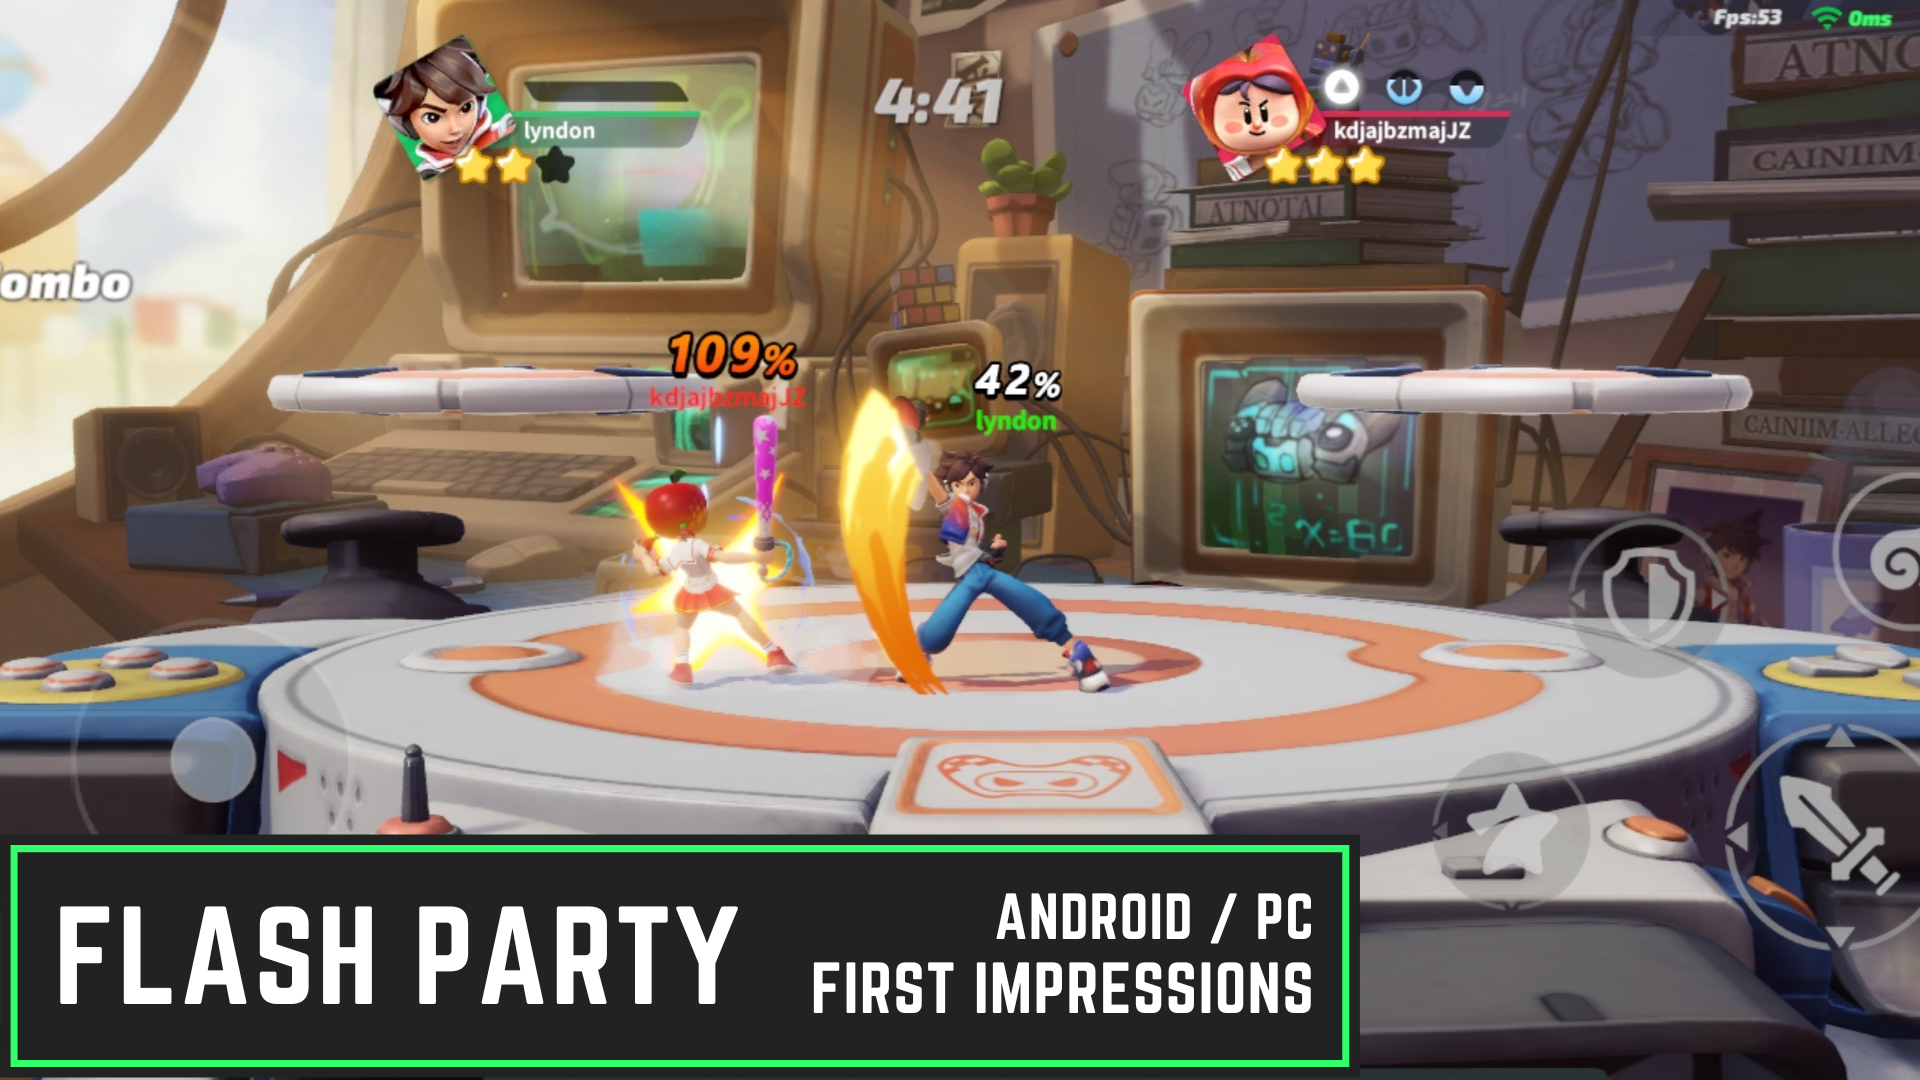 Super Smash Bros. Mobile Copy? - FLASH PARTY - PvP Fighting Game